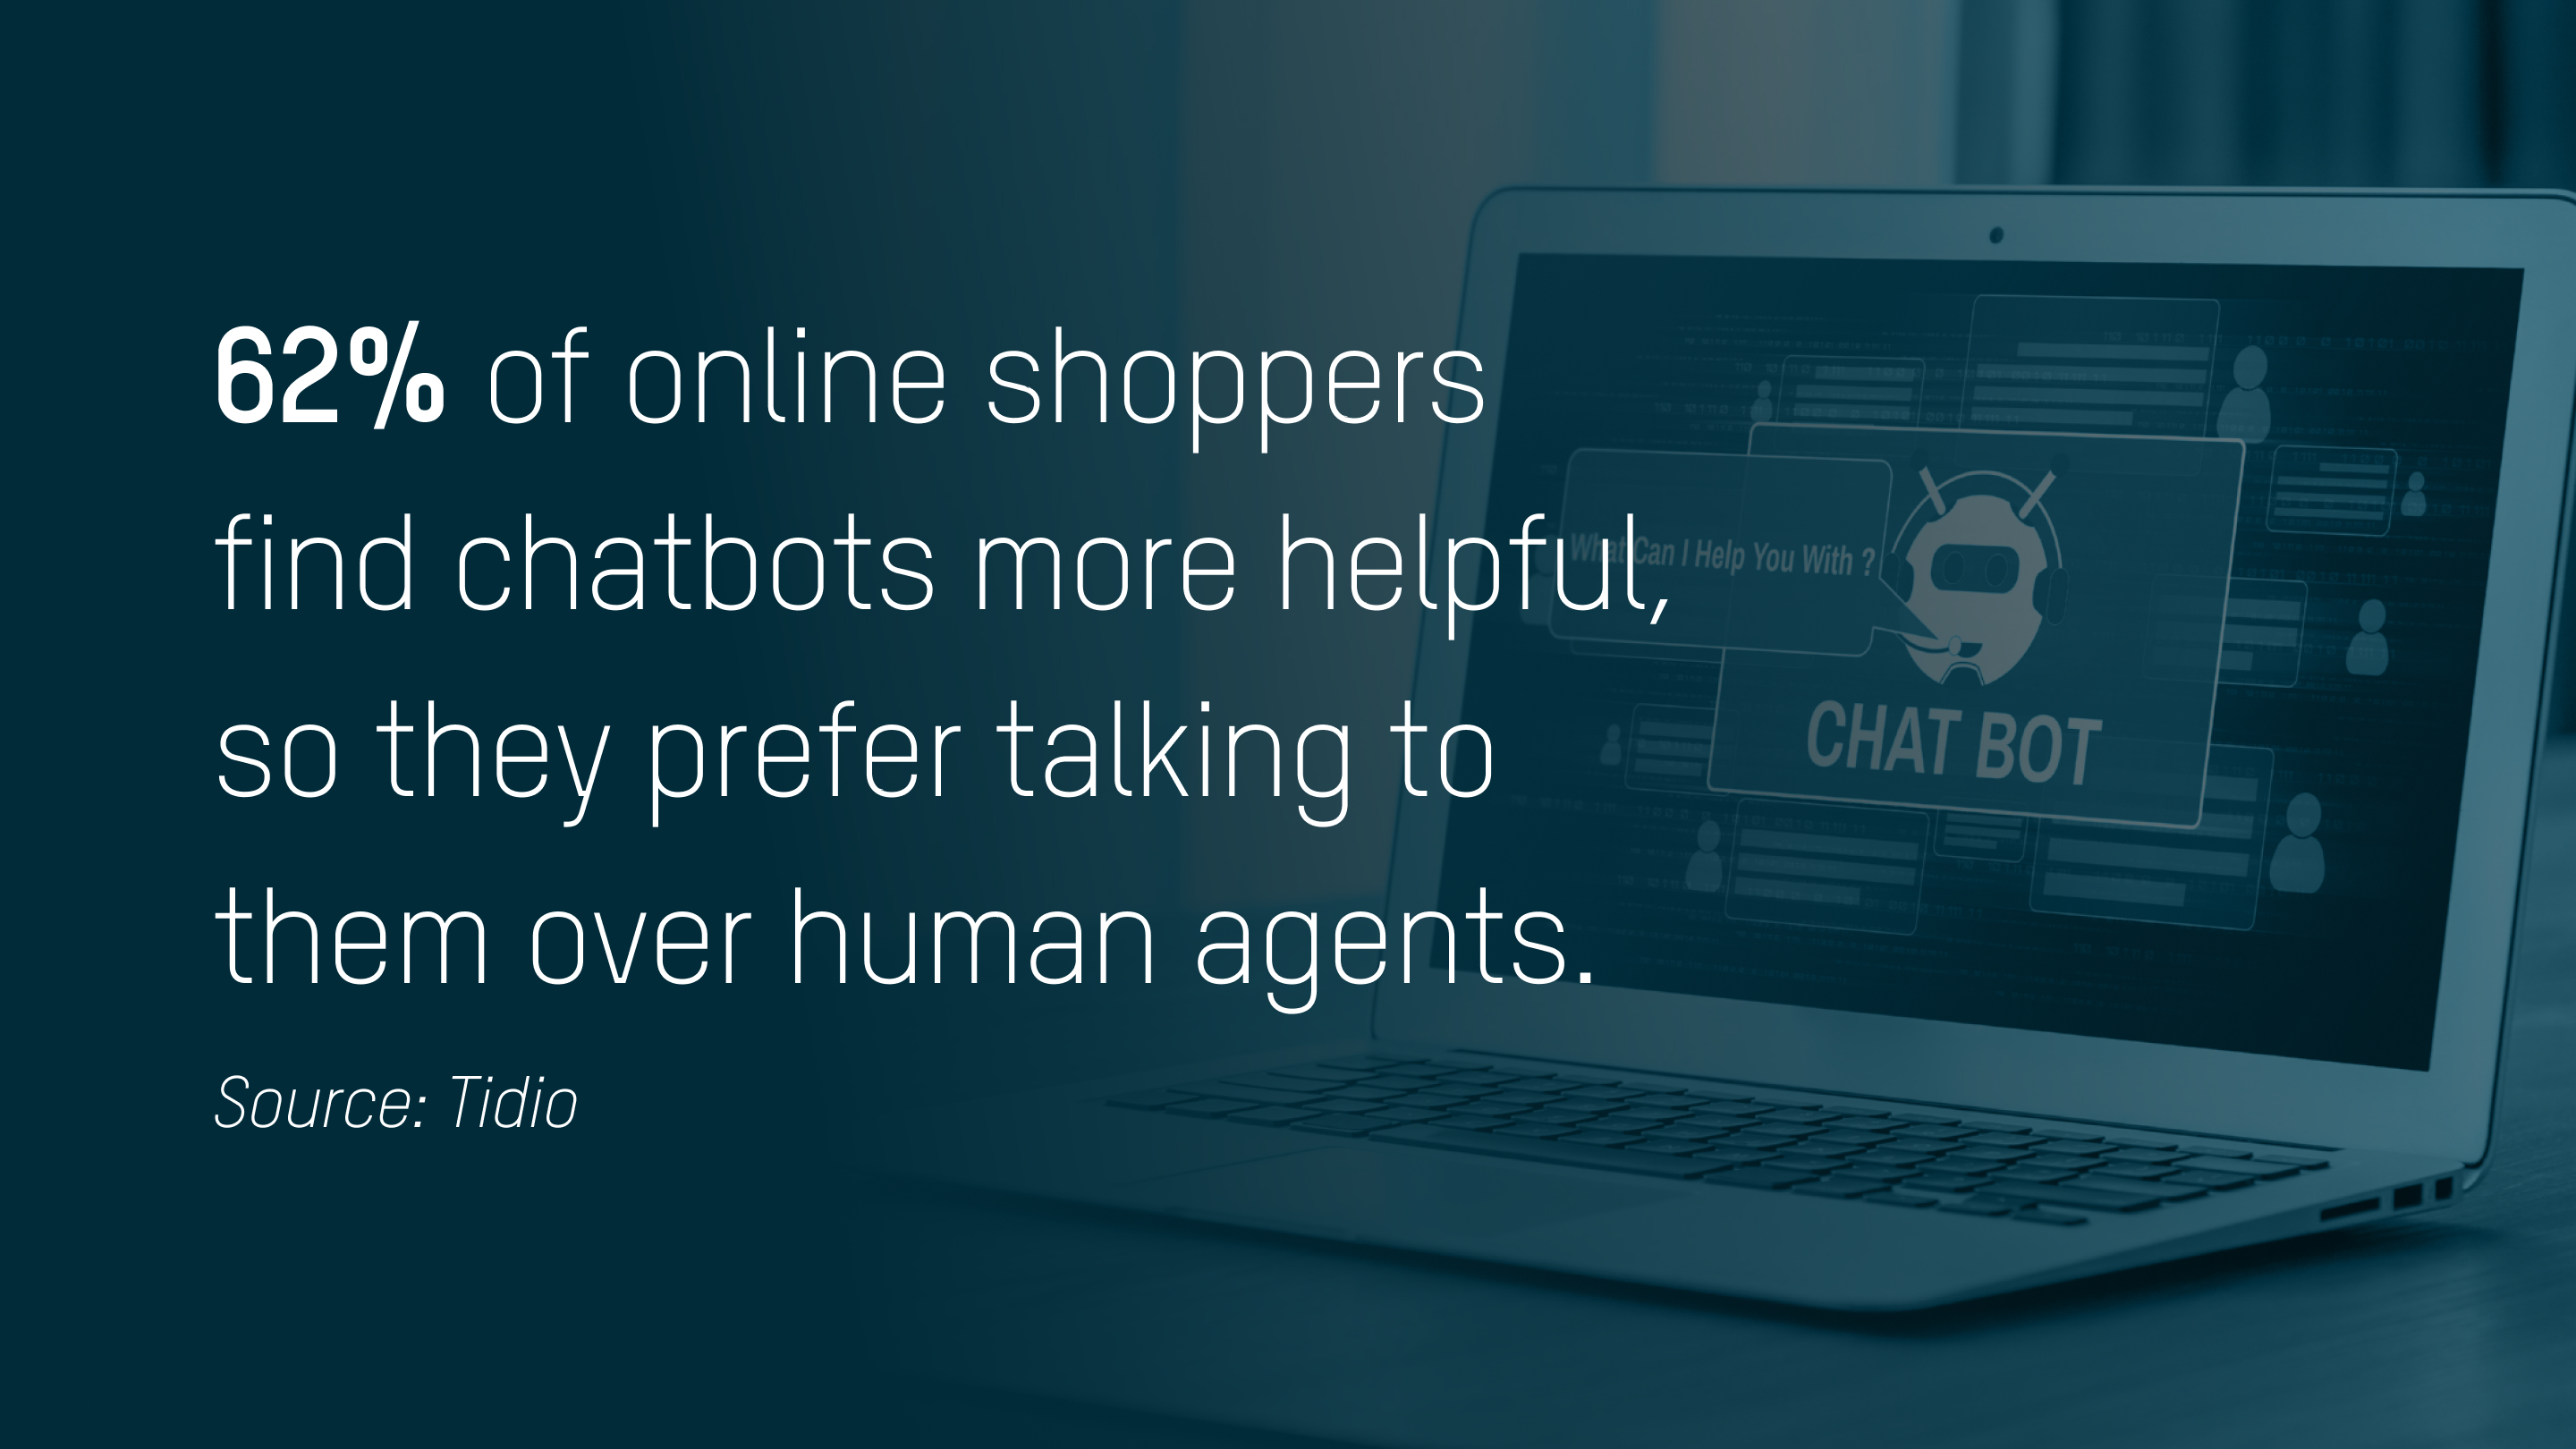 62% of online shoppers find chatbots more helpful, so they prefer talking to them over human agents. (Source: Tidio)